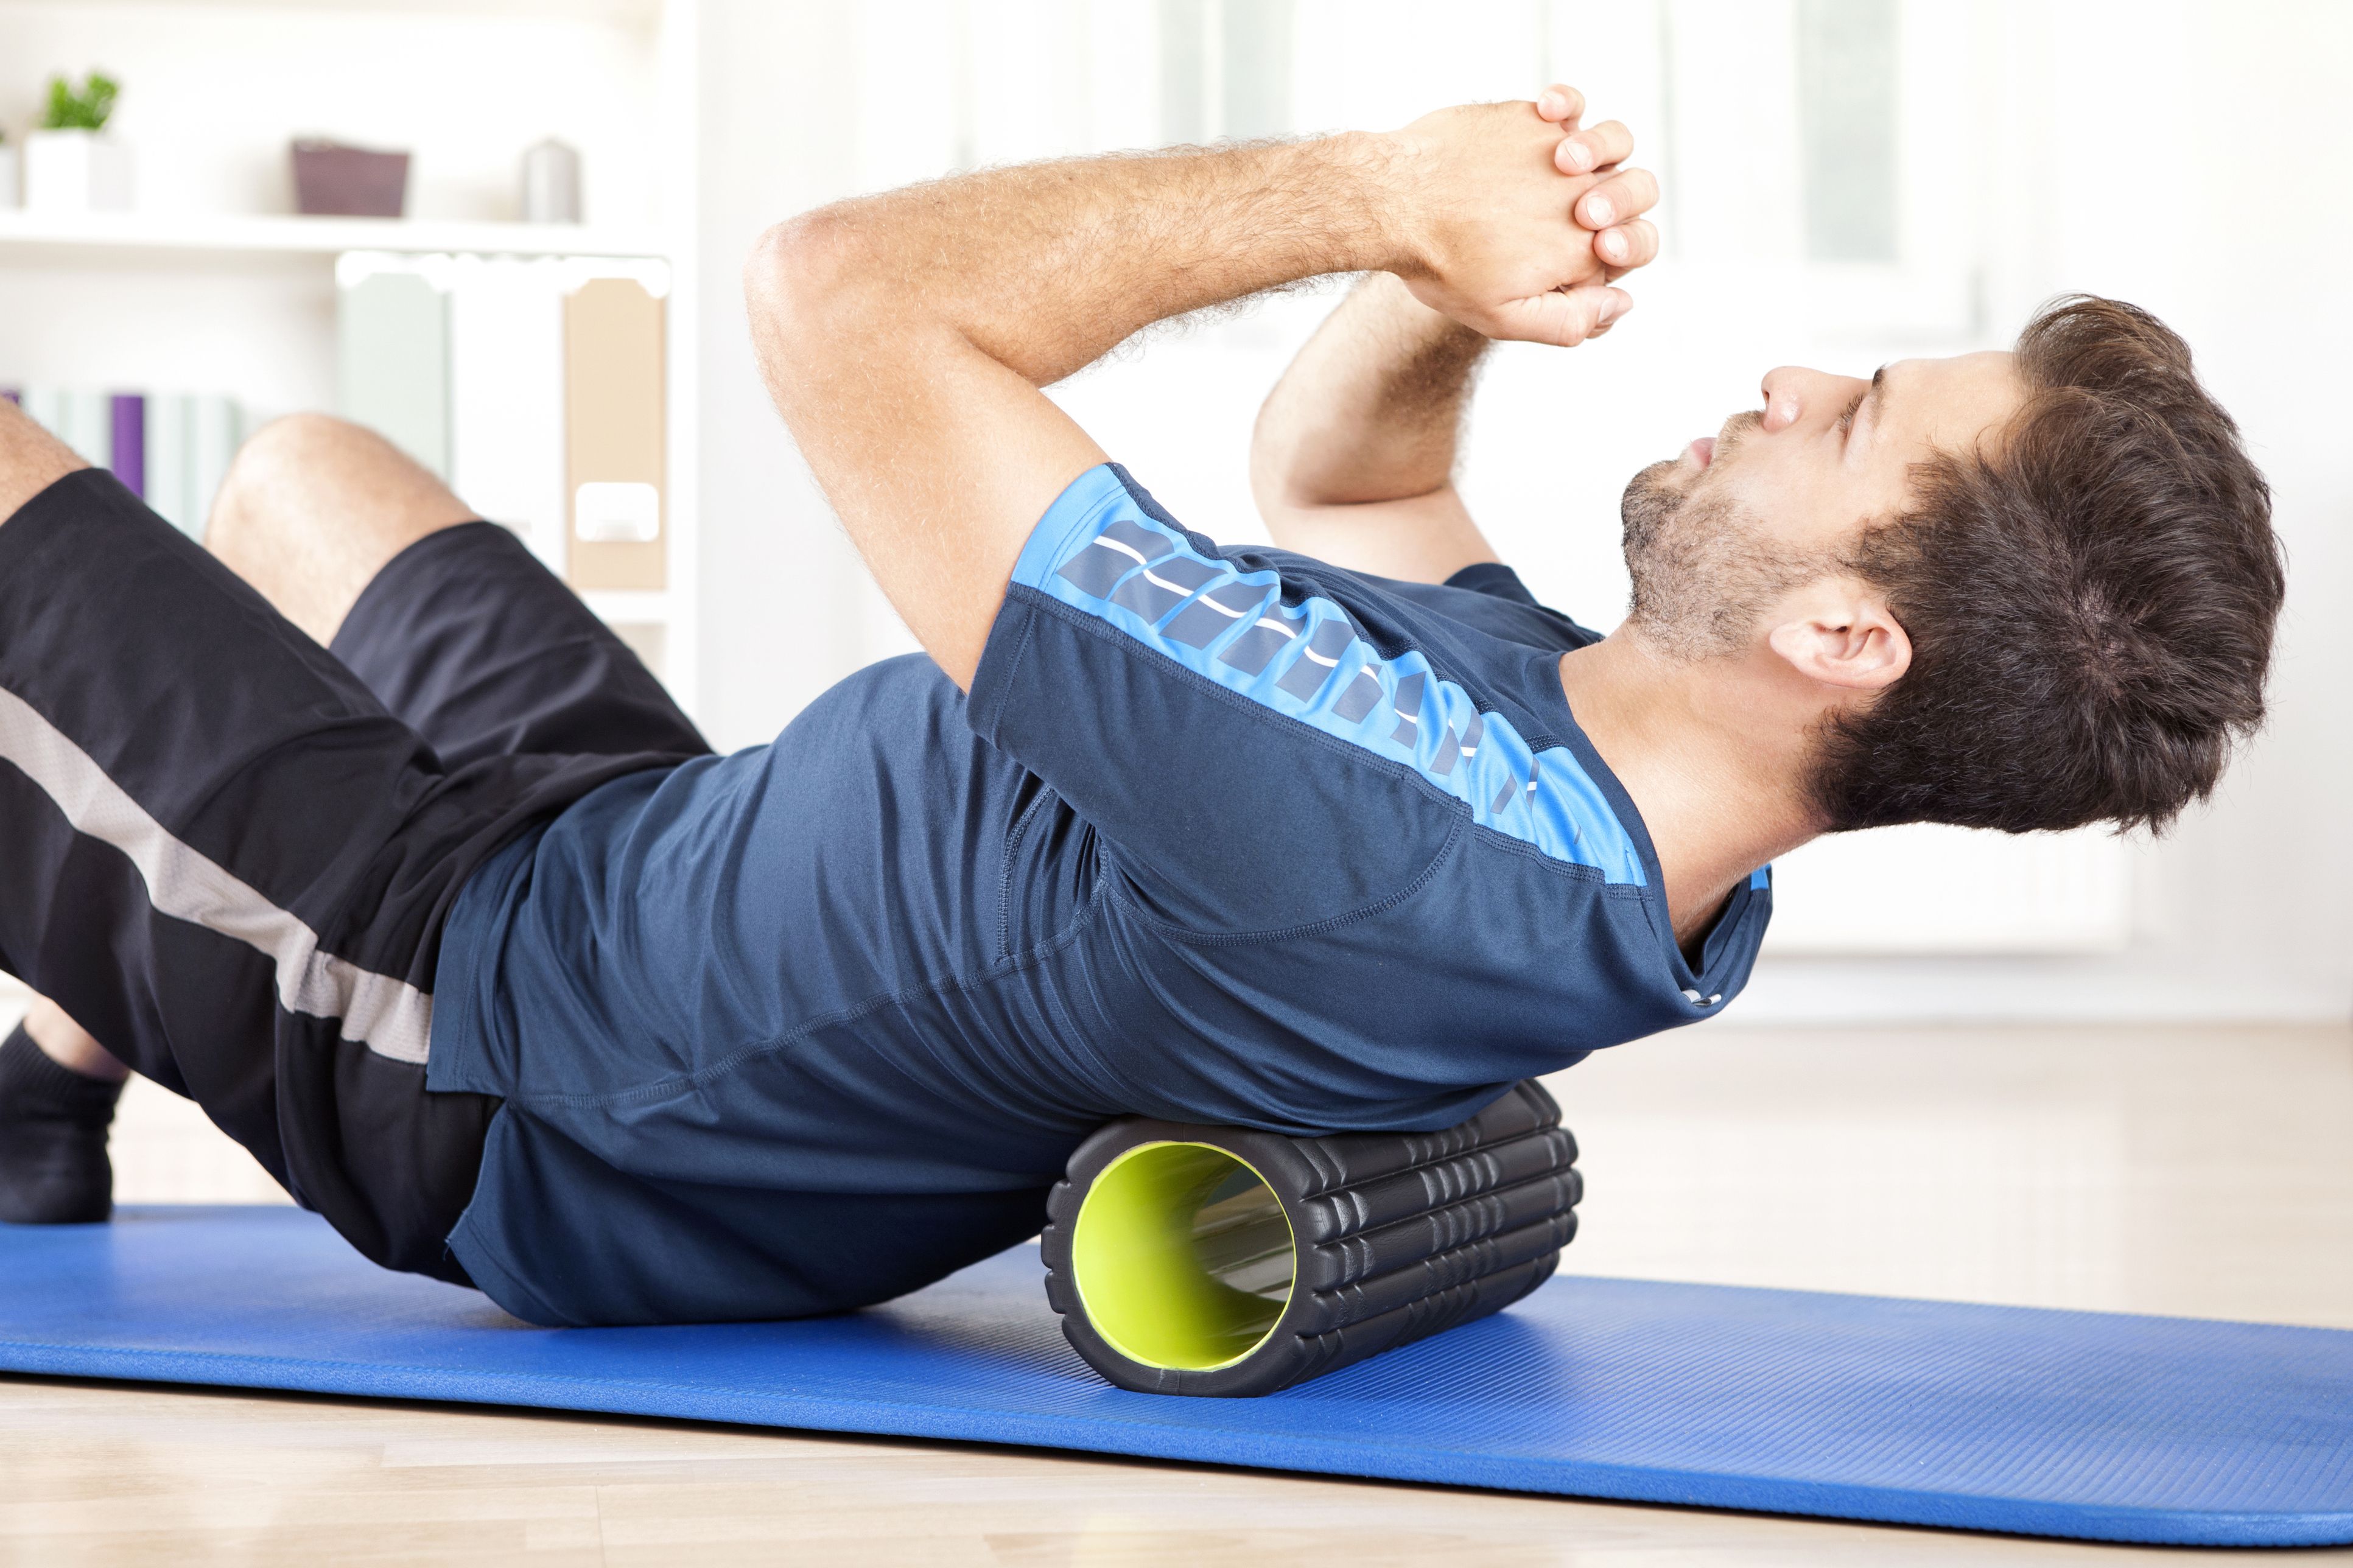 https://hips.hearstapps.com/hmg-prod/images/man-lying-on-a-foam-roller-while-doing-an-exercise-royalty-free-image-509421384-1545148853.jpg